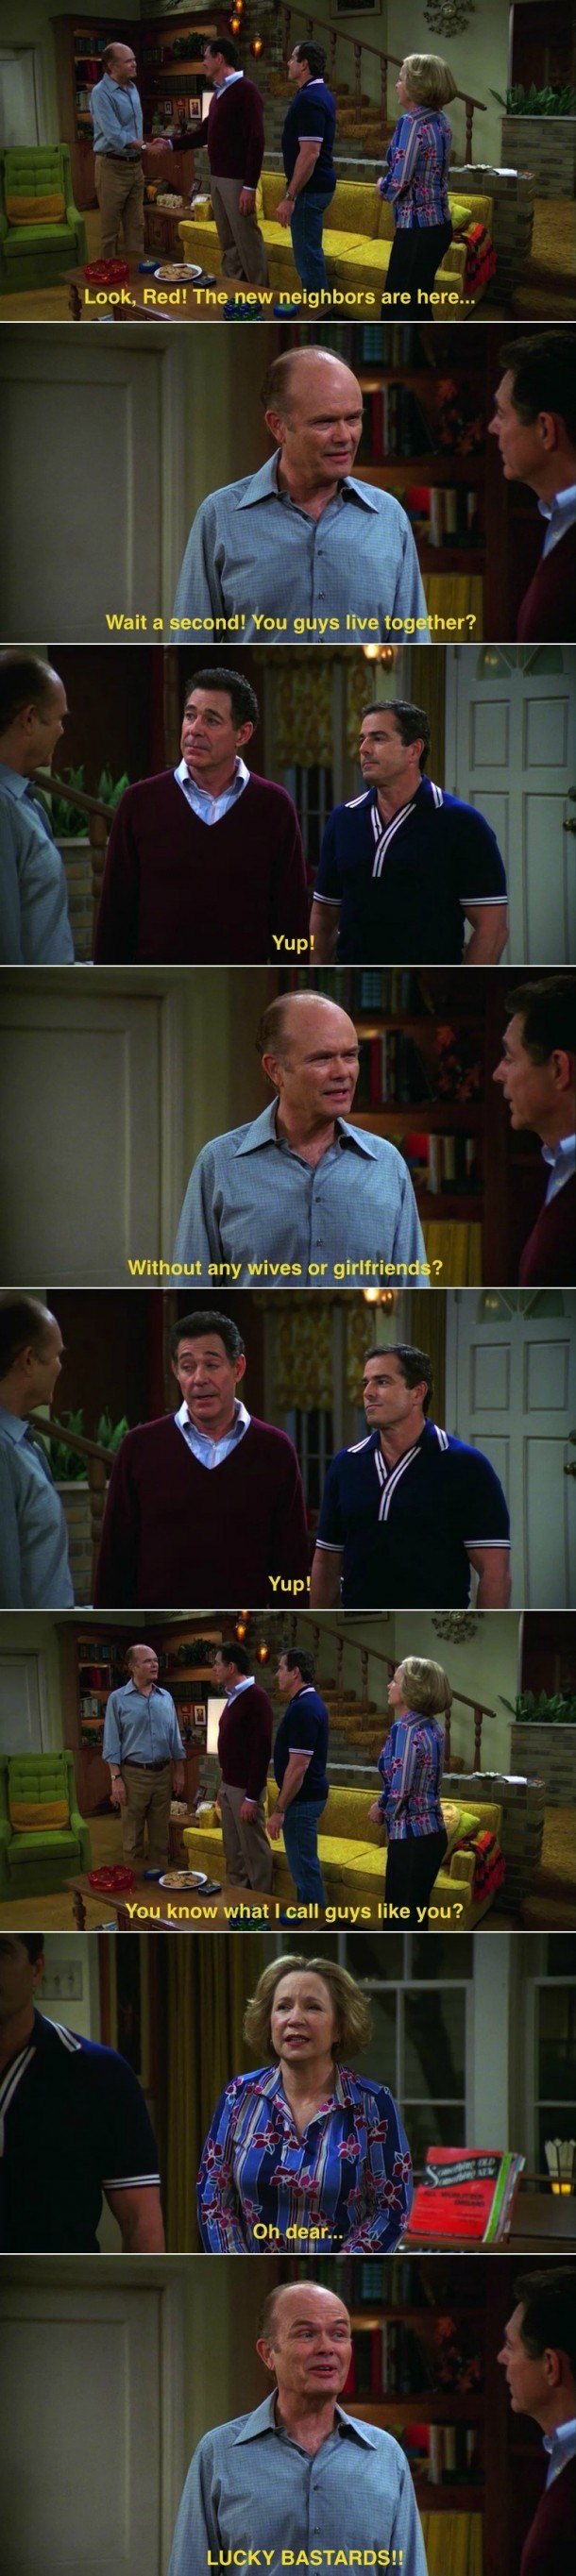 Red Forman meets the neighbors